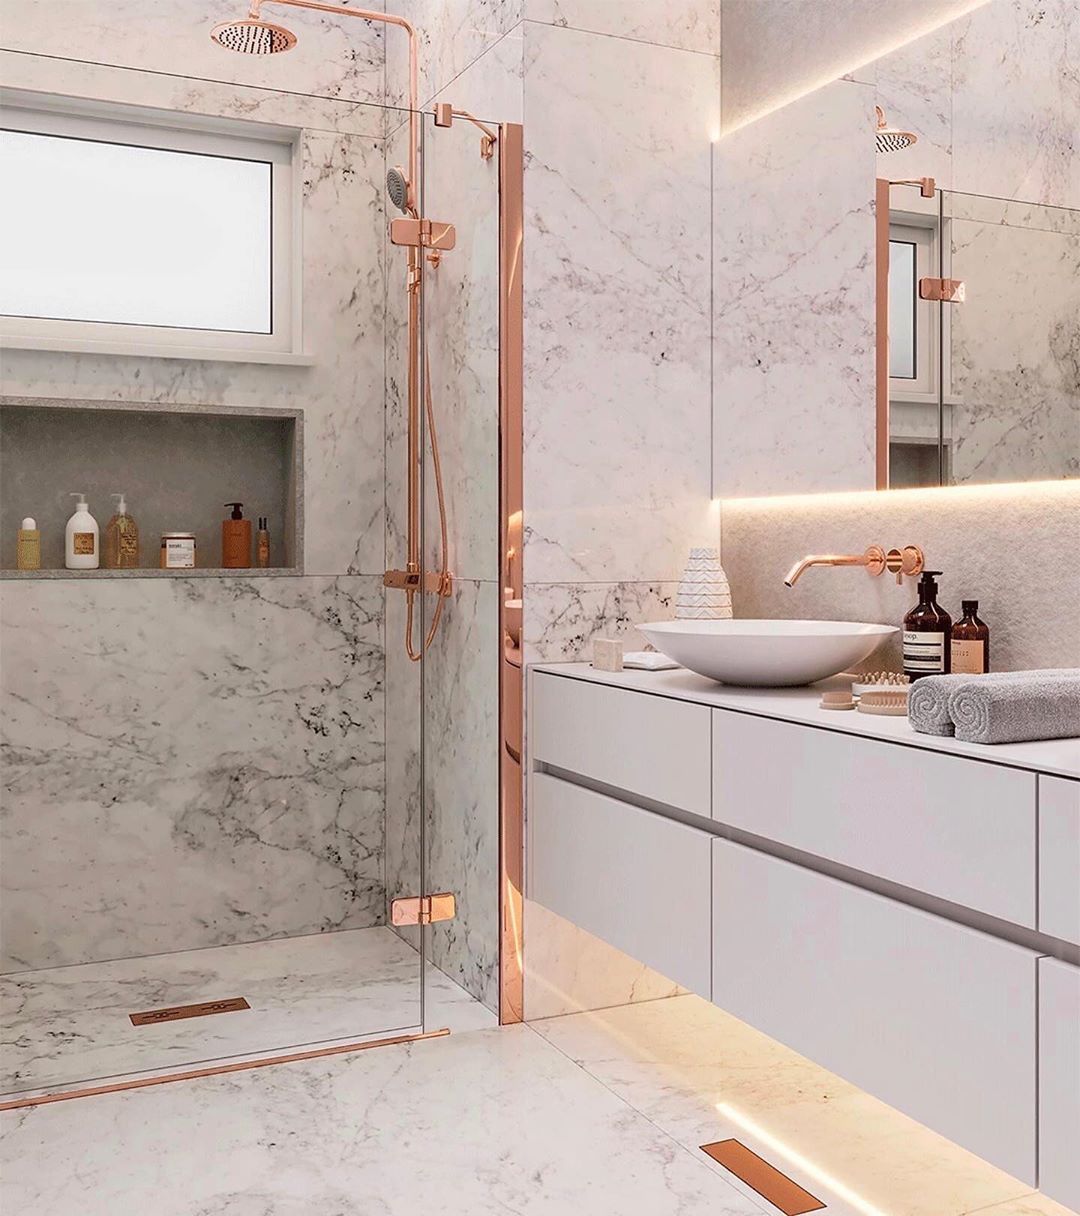 Wonderful bathroom all in marble, with Rosé Gold metals completing the